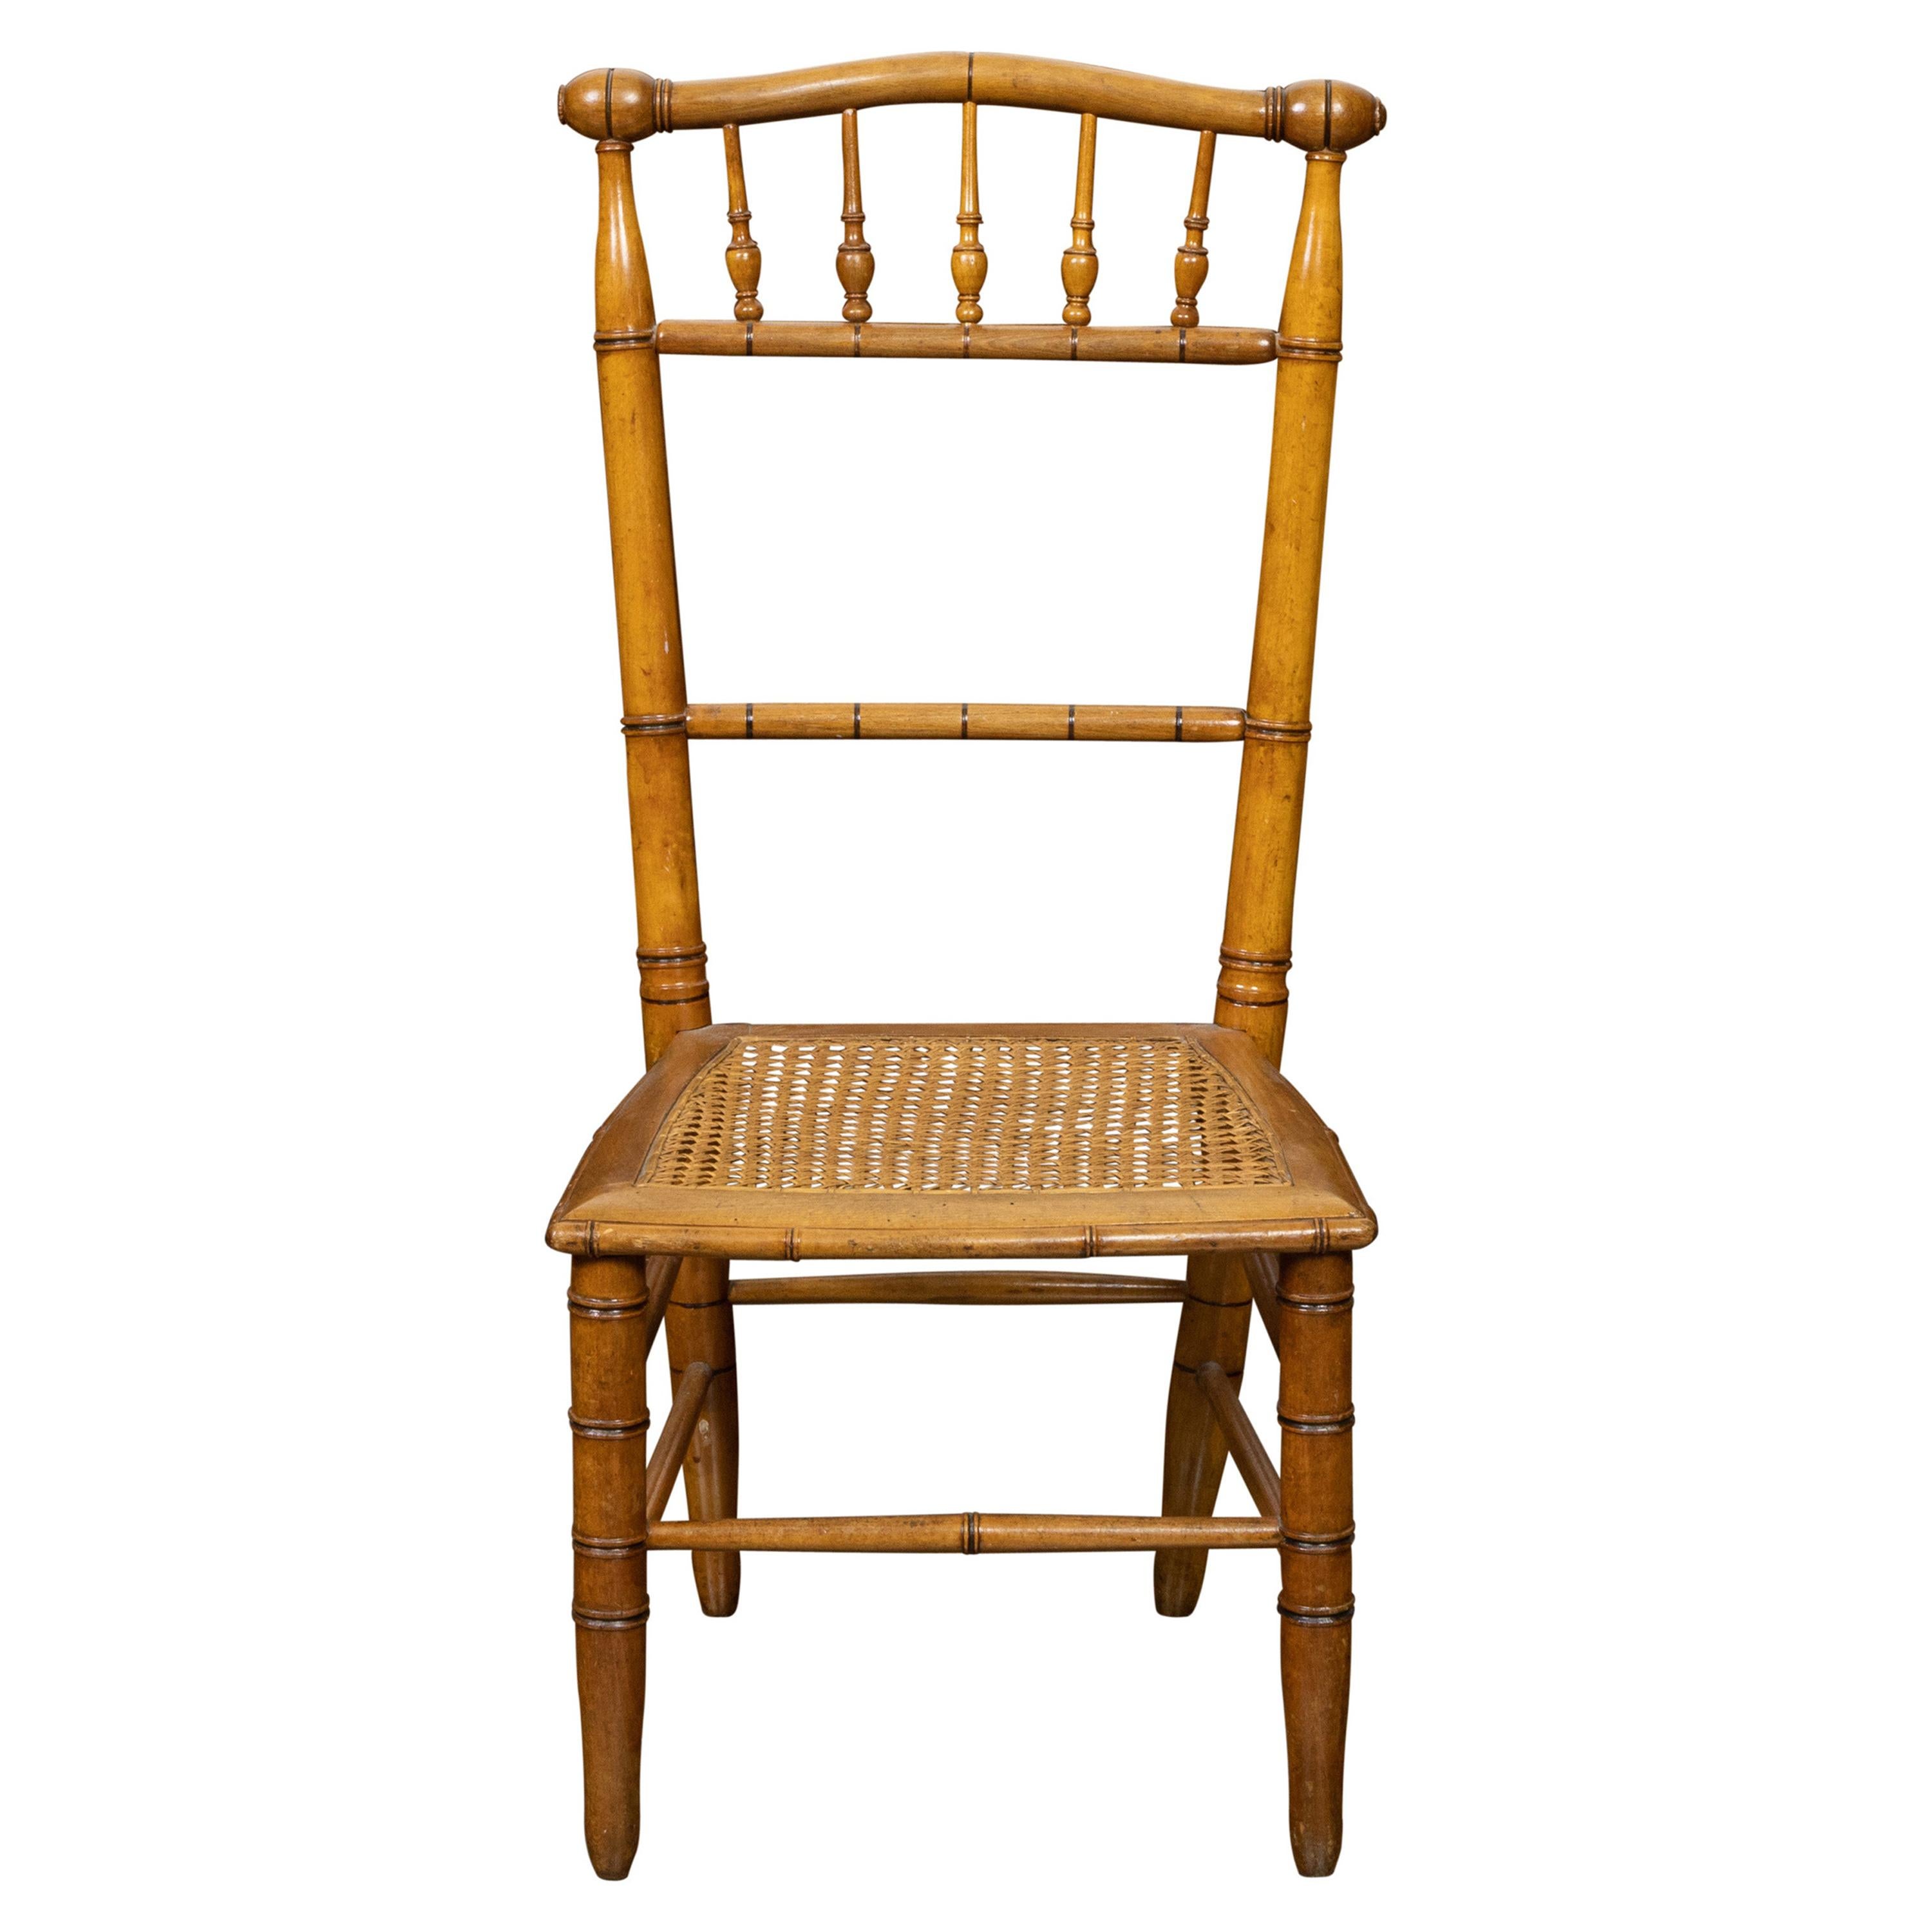 English Turn of the Century 1900s Bamboo Slipper Chair with Cane Seat For Sale